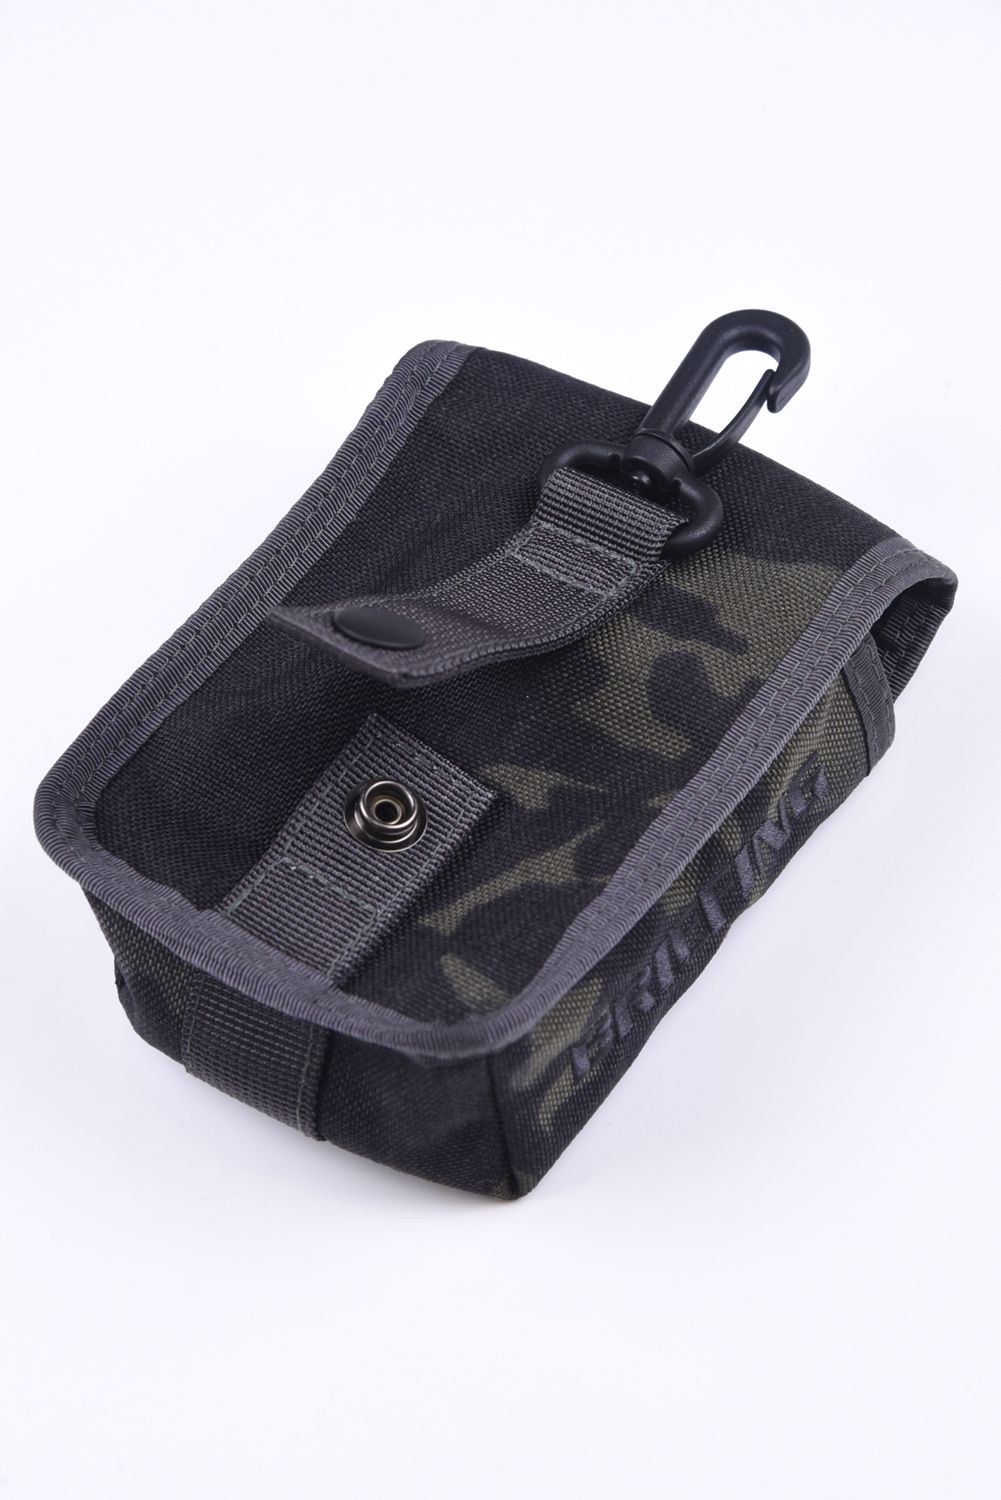 BRIEFING - 【1000Dコーデュラナイロン】 SCOPE BOX POUCH 